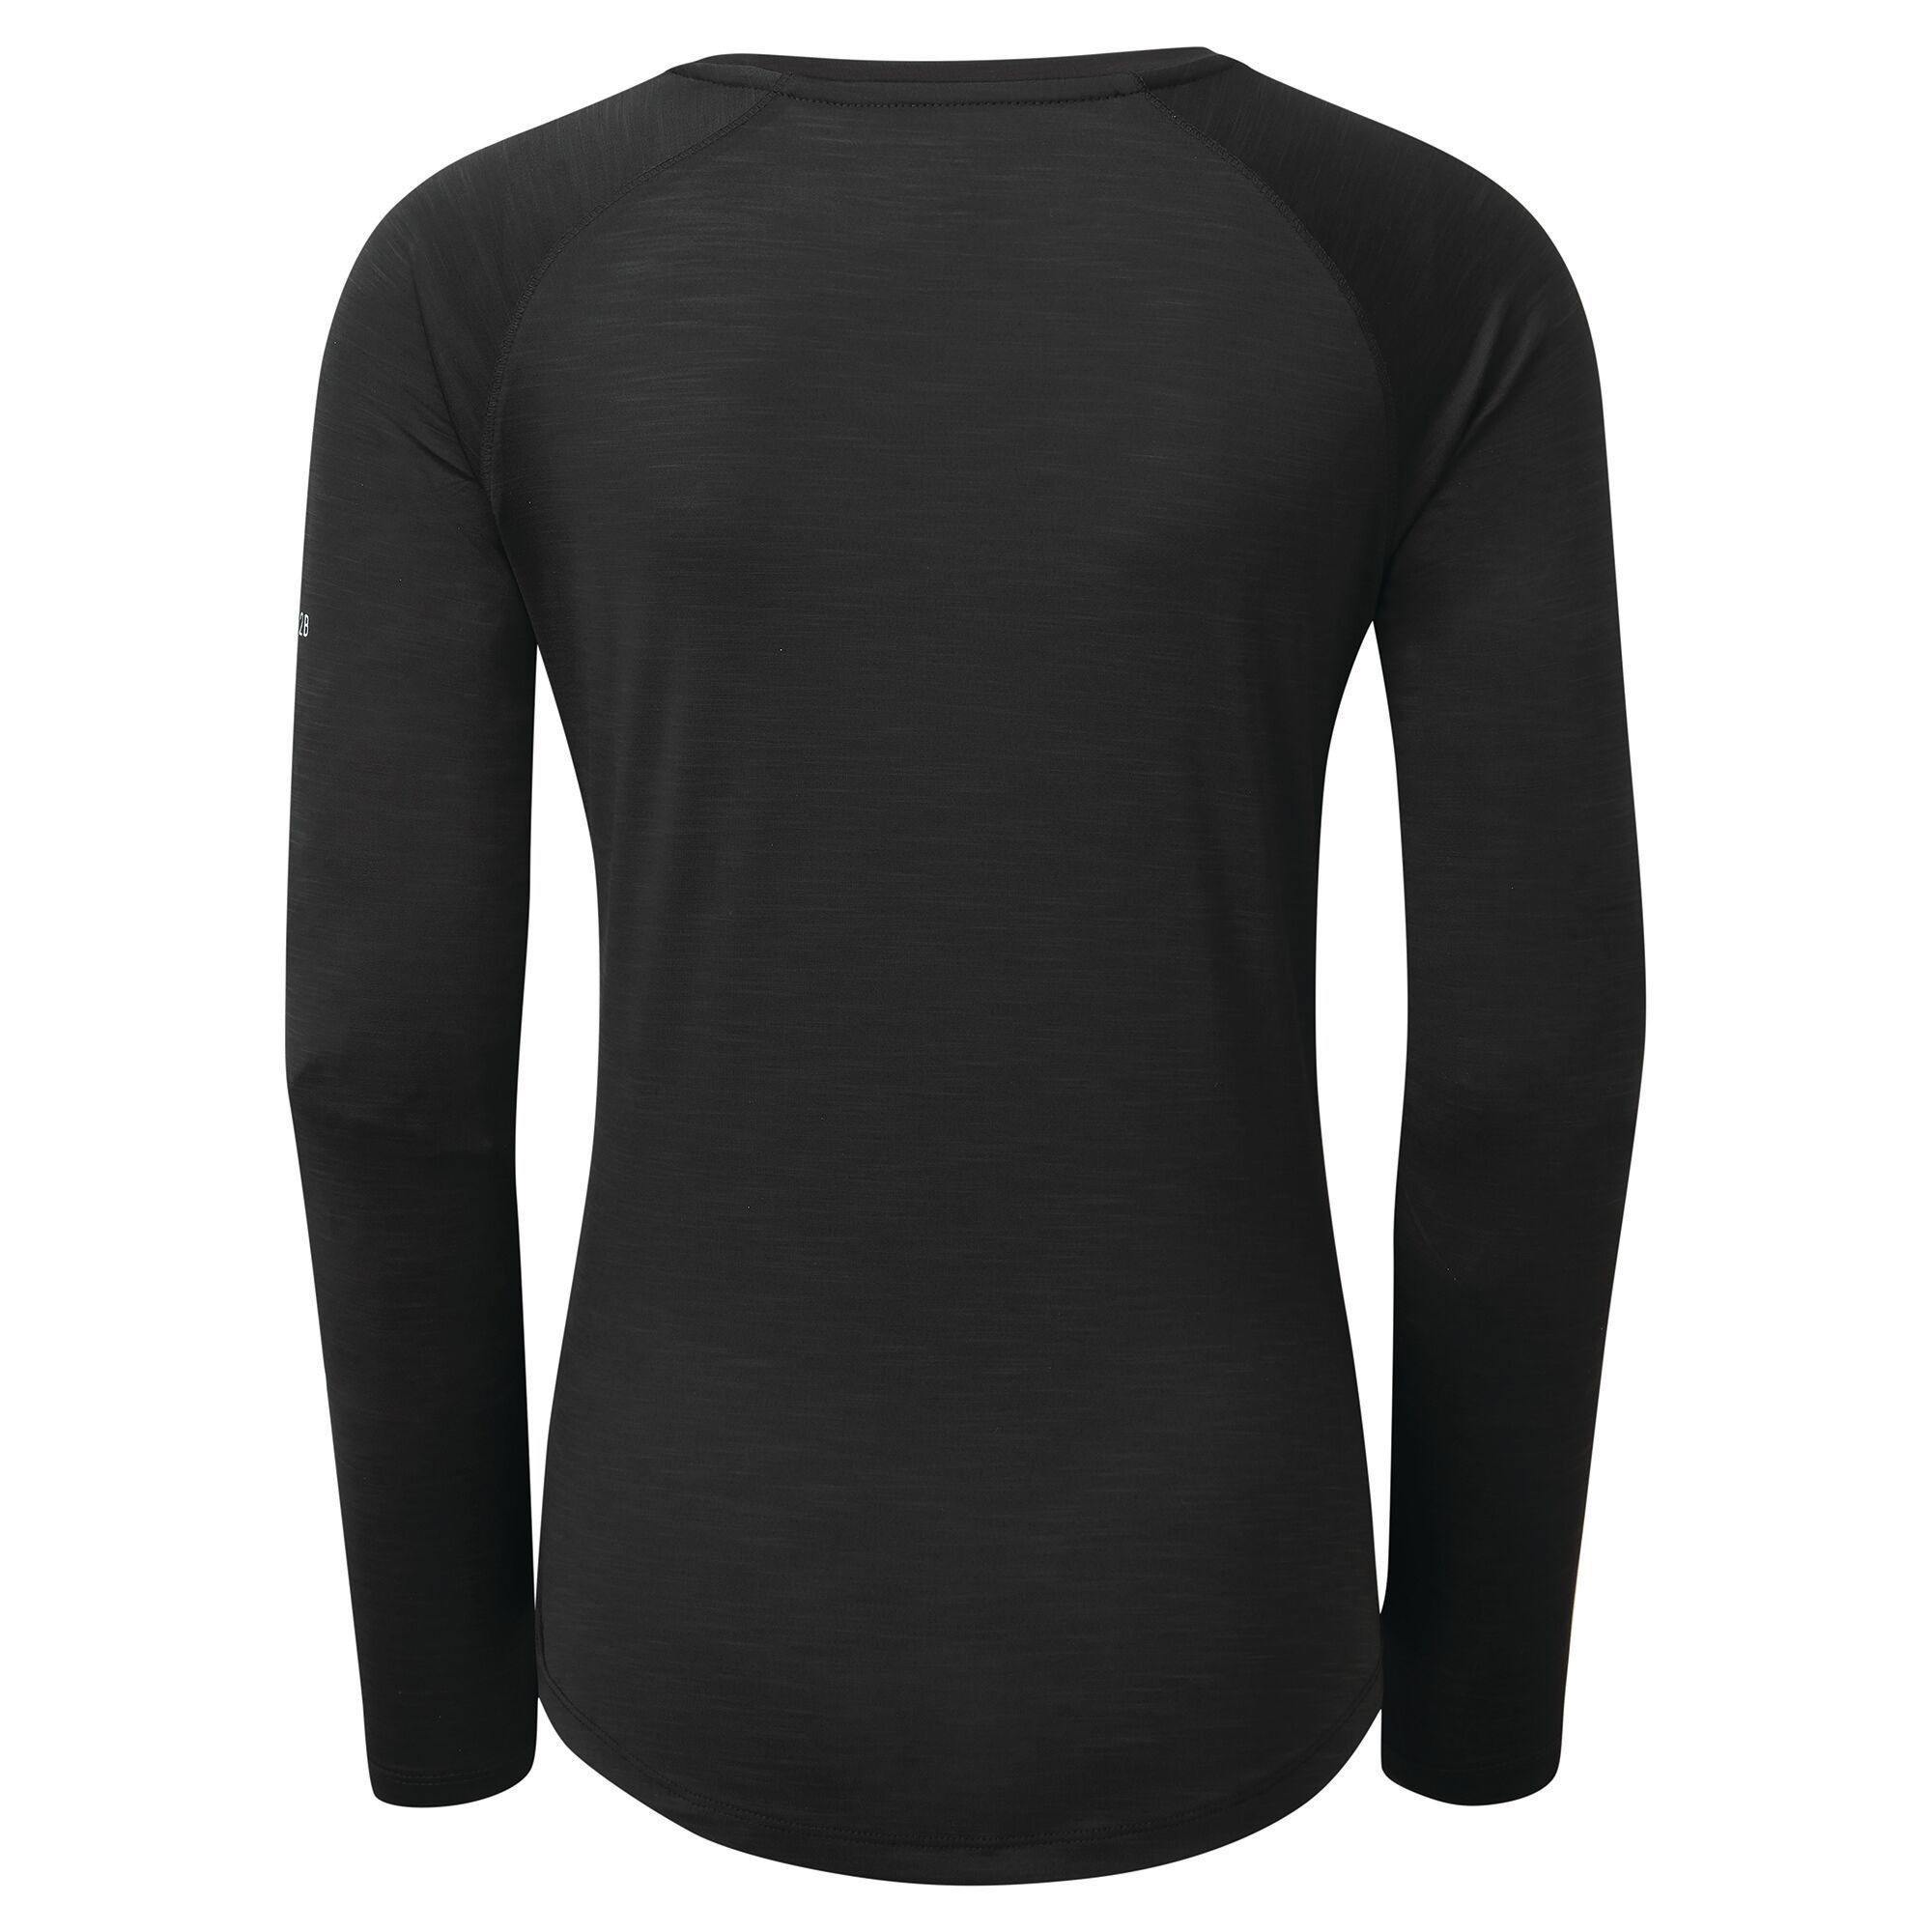 Material: 90% Polyester (Q-Wic Plus lightweight polyester), 10% Elastane. Supremely soft and light-to-wear long-sleeved, v-neck workout t-shirt. Fabric provides UPF 50+ protection and features anti-bacterial odour control built in.